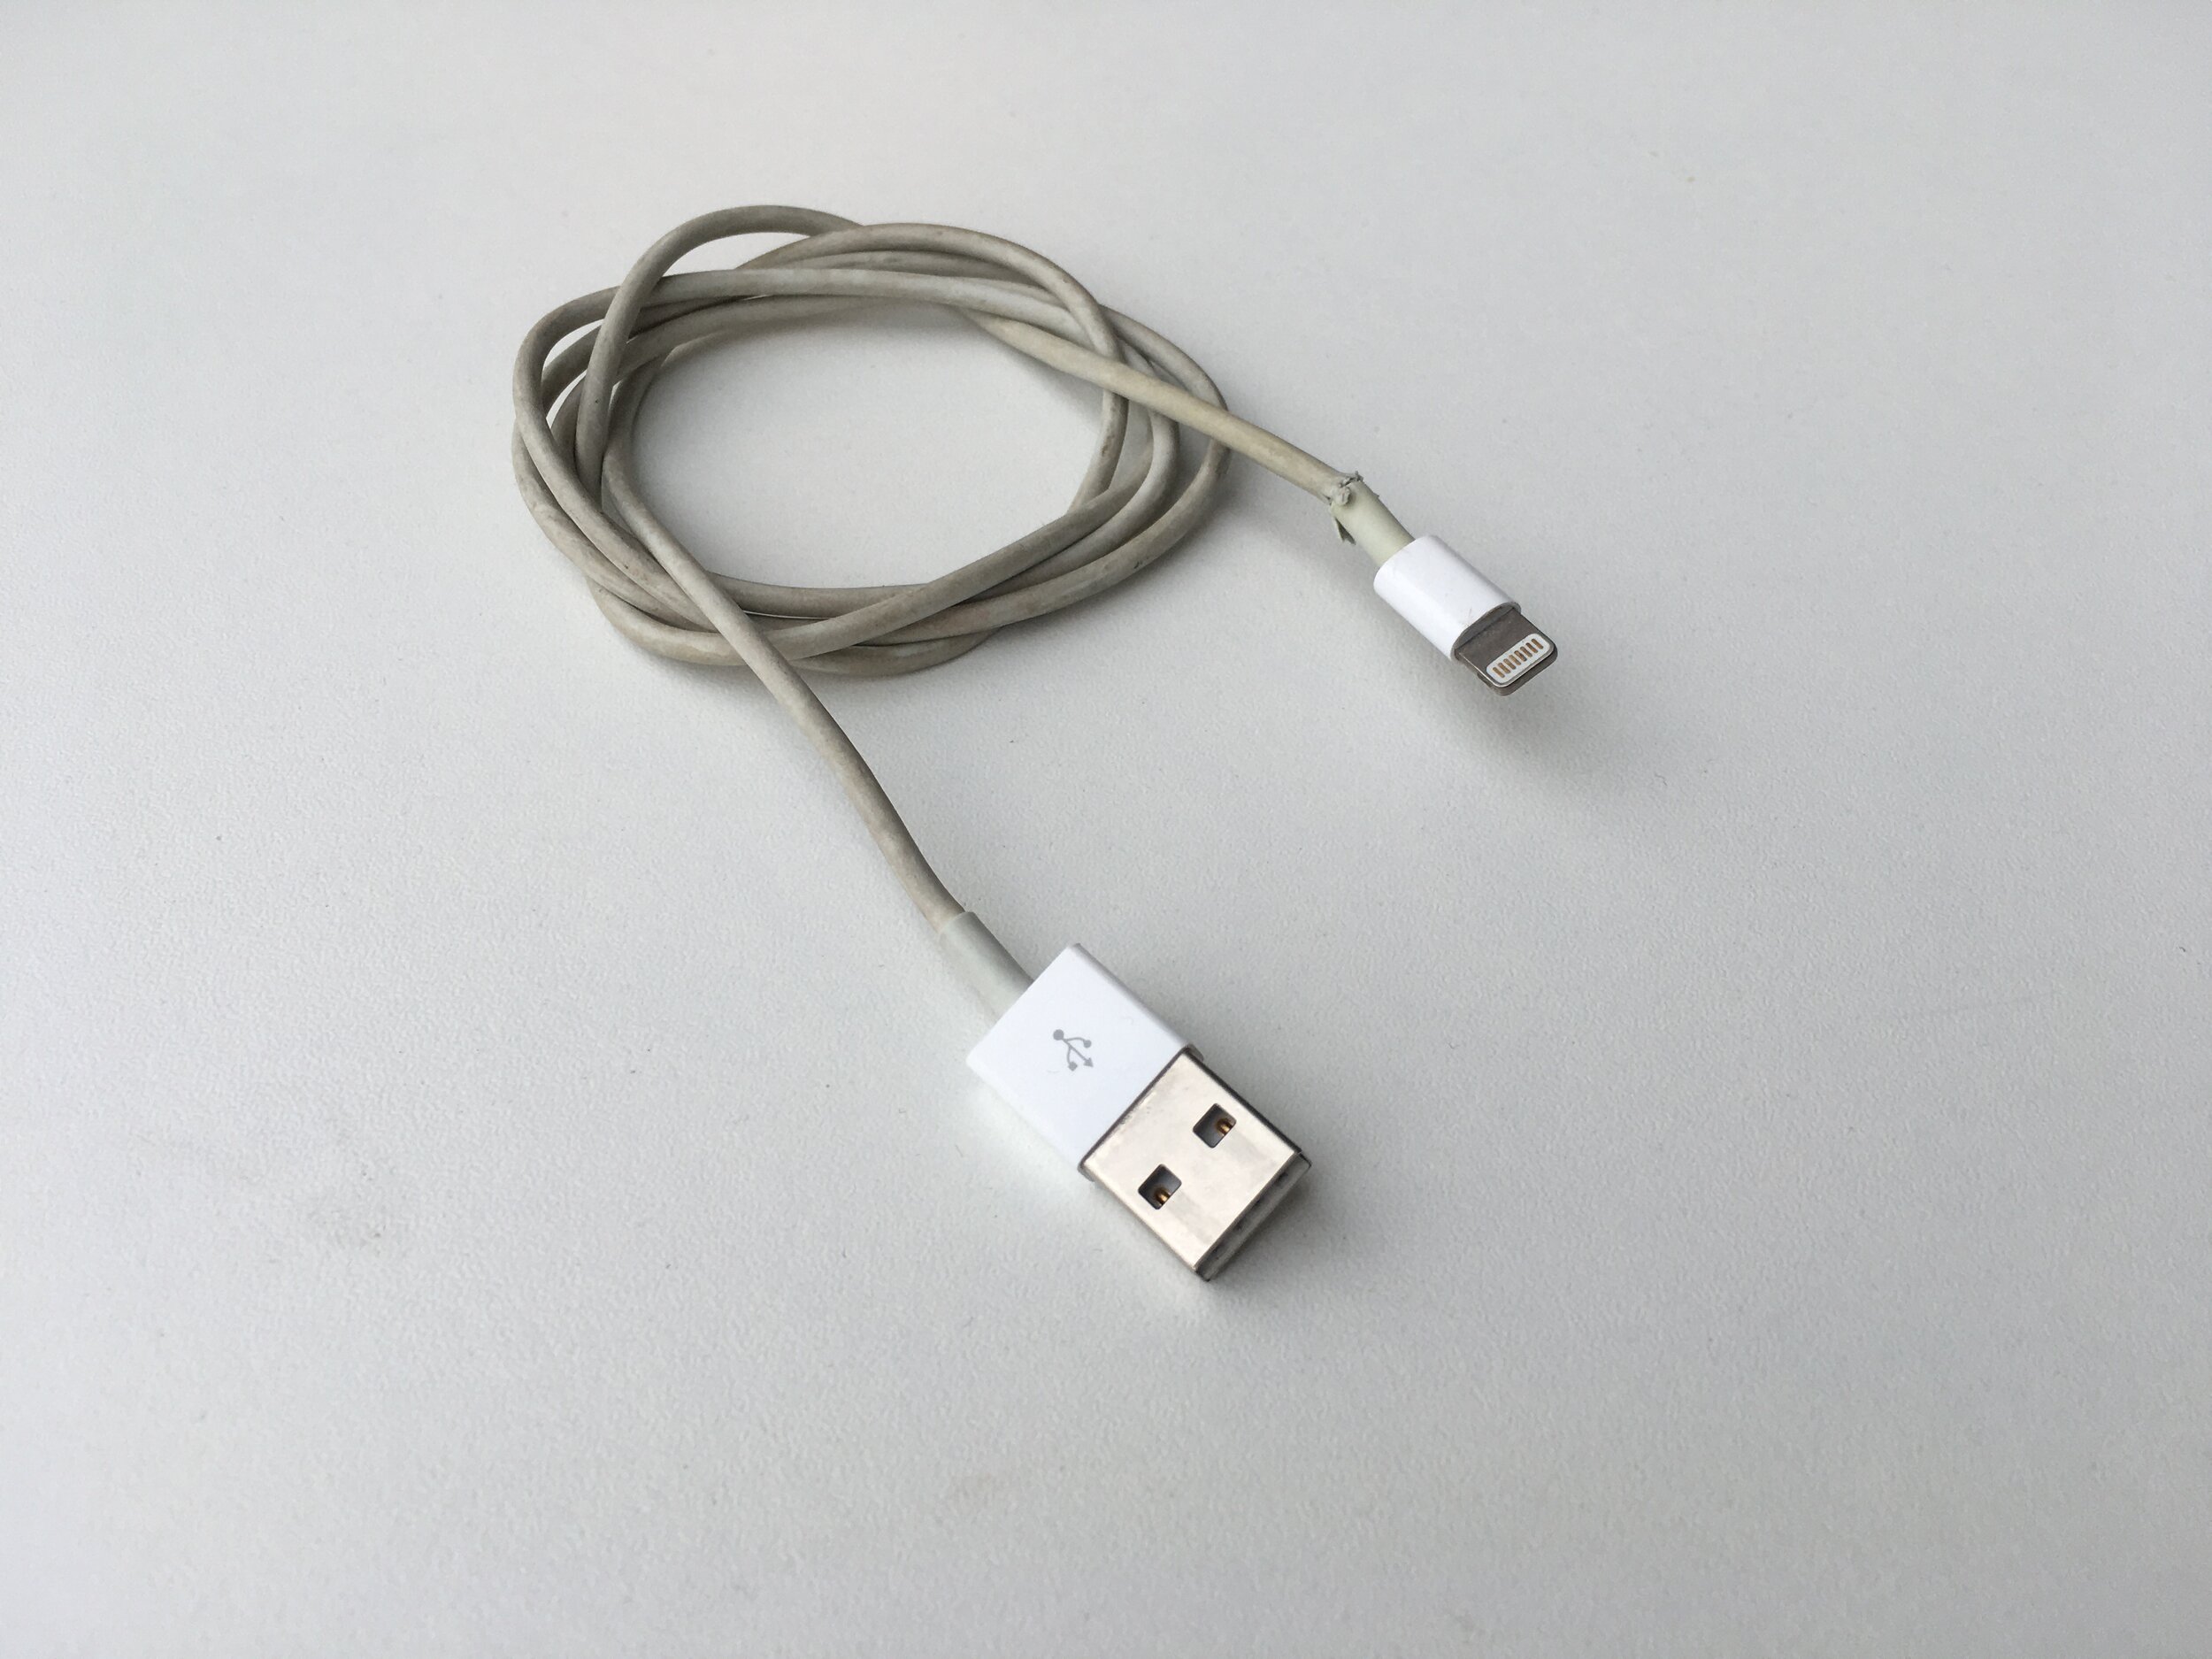 Apple How to identify Fake vs Original Apple Lightning Cable